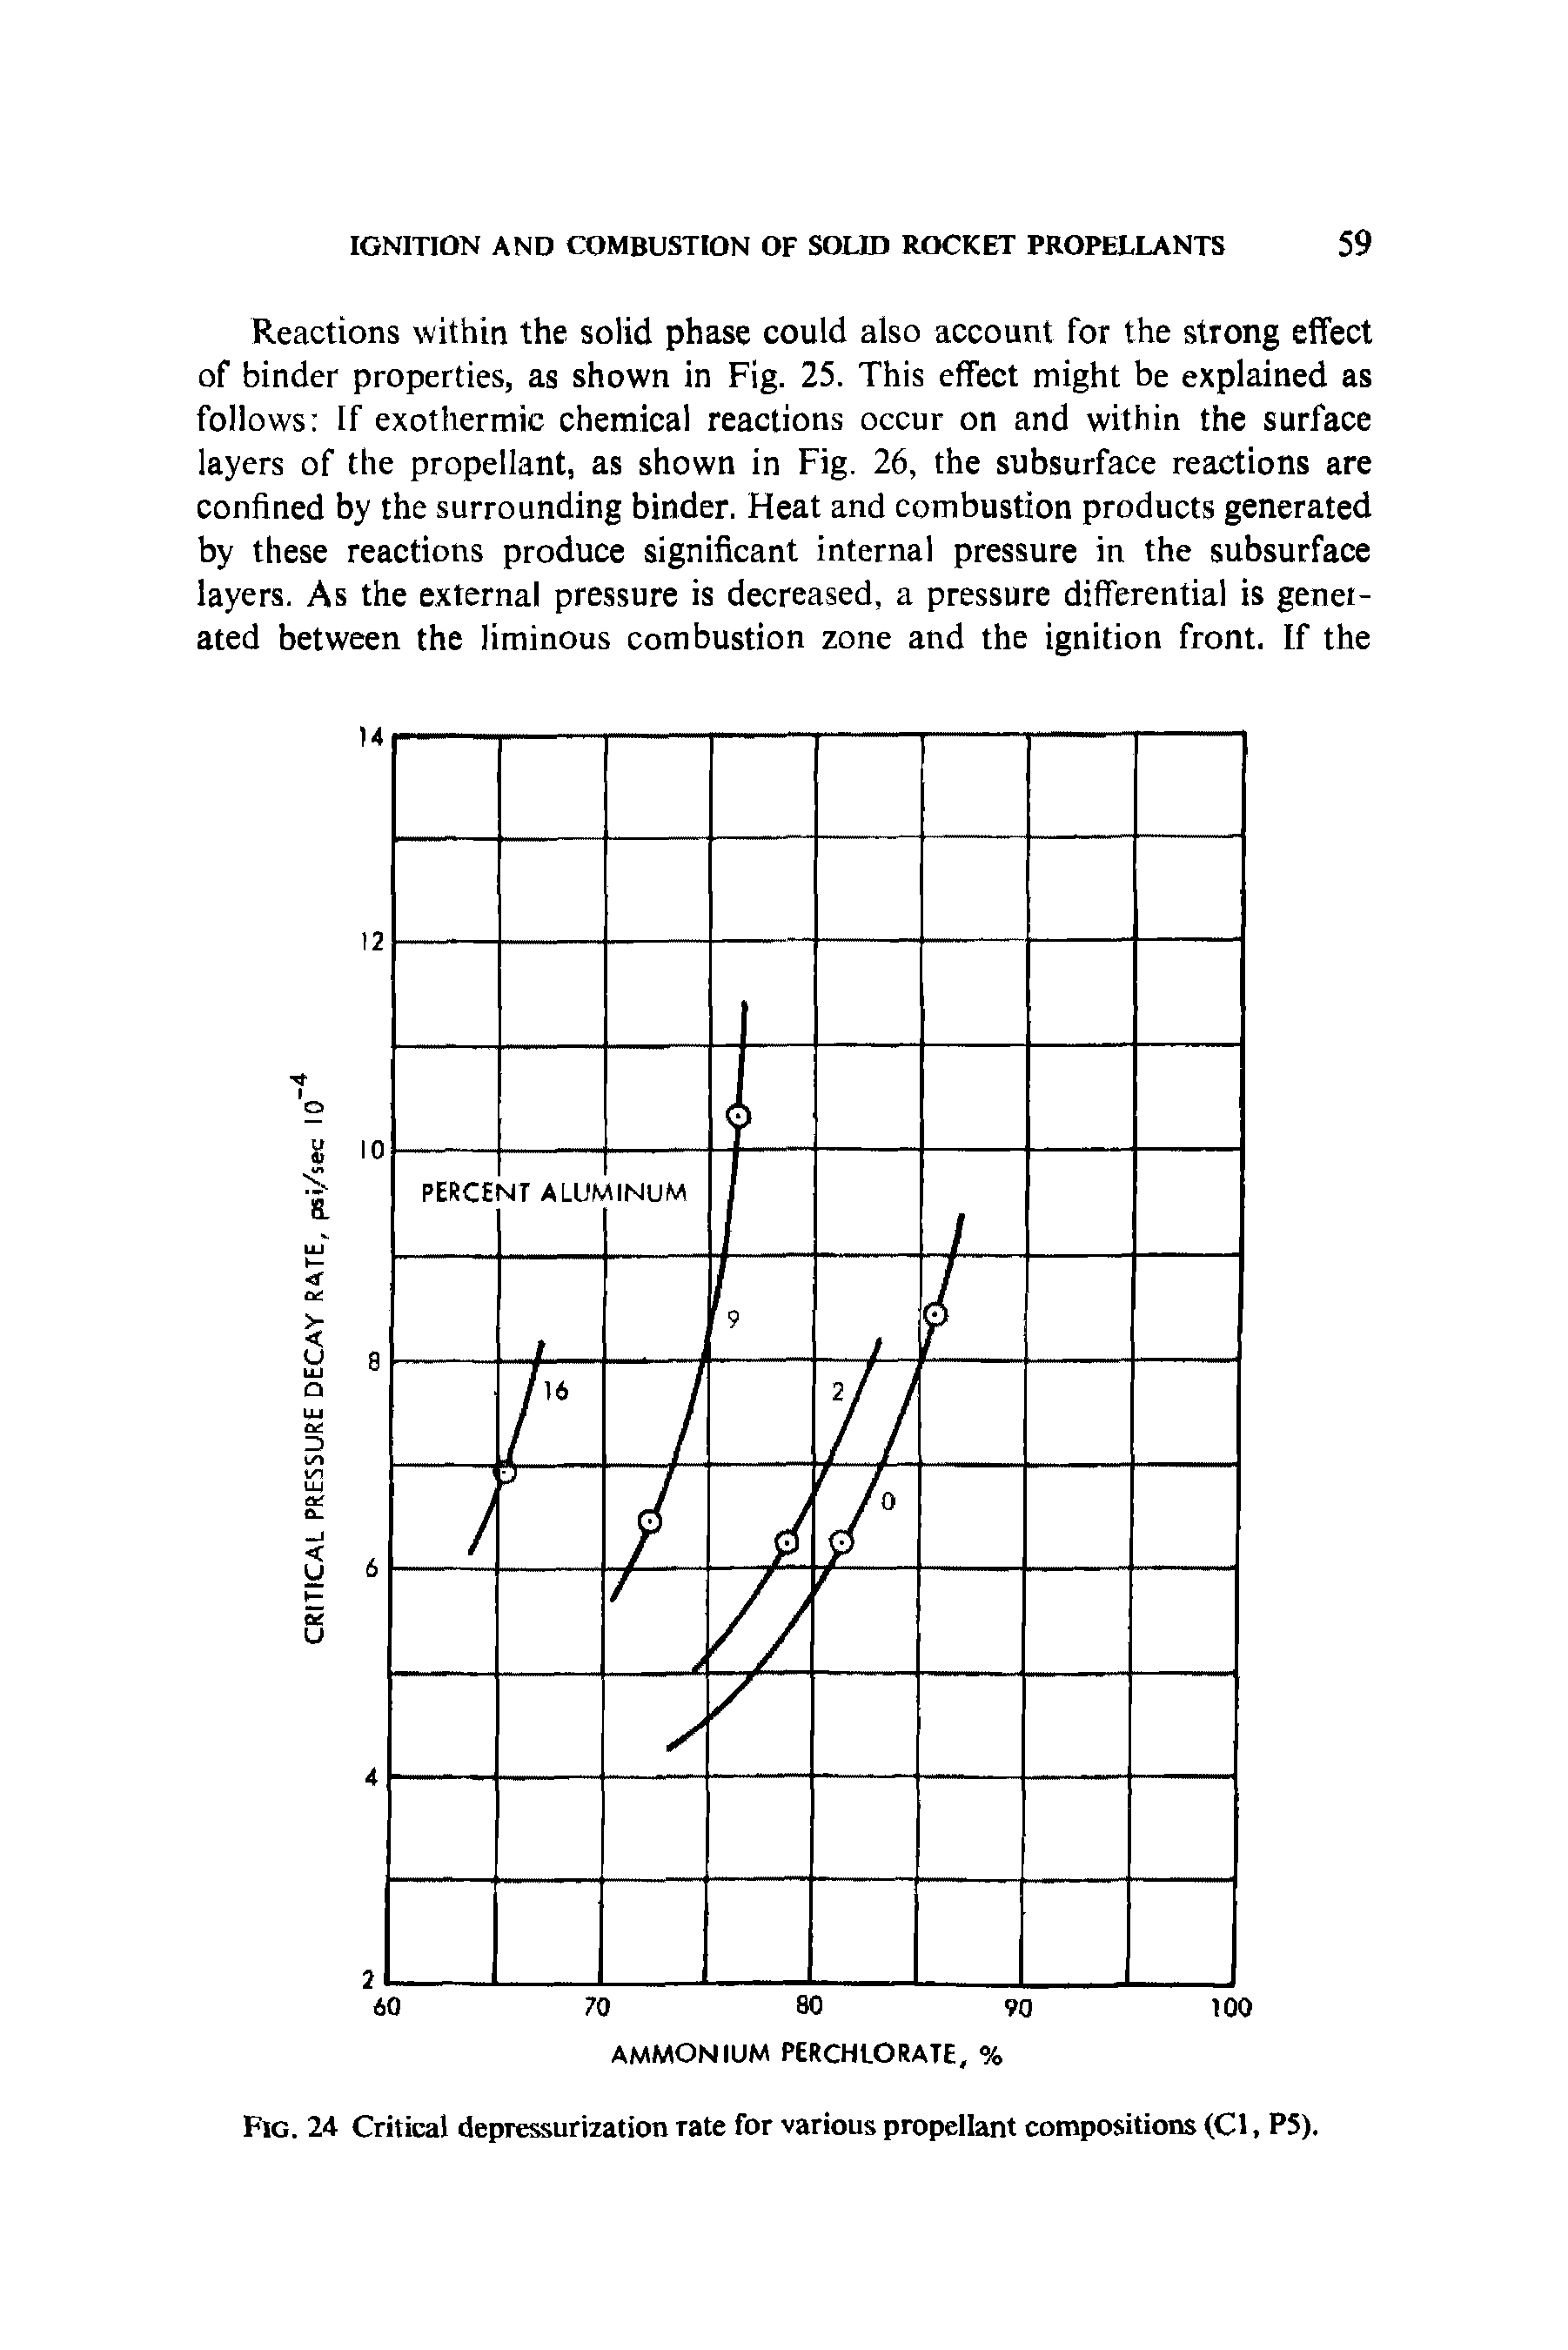 Fig. 24 Critical depressurization Tate for various propellant compositions (Cl, P5).